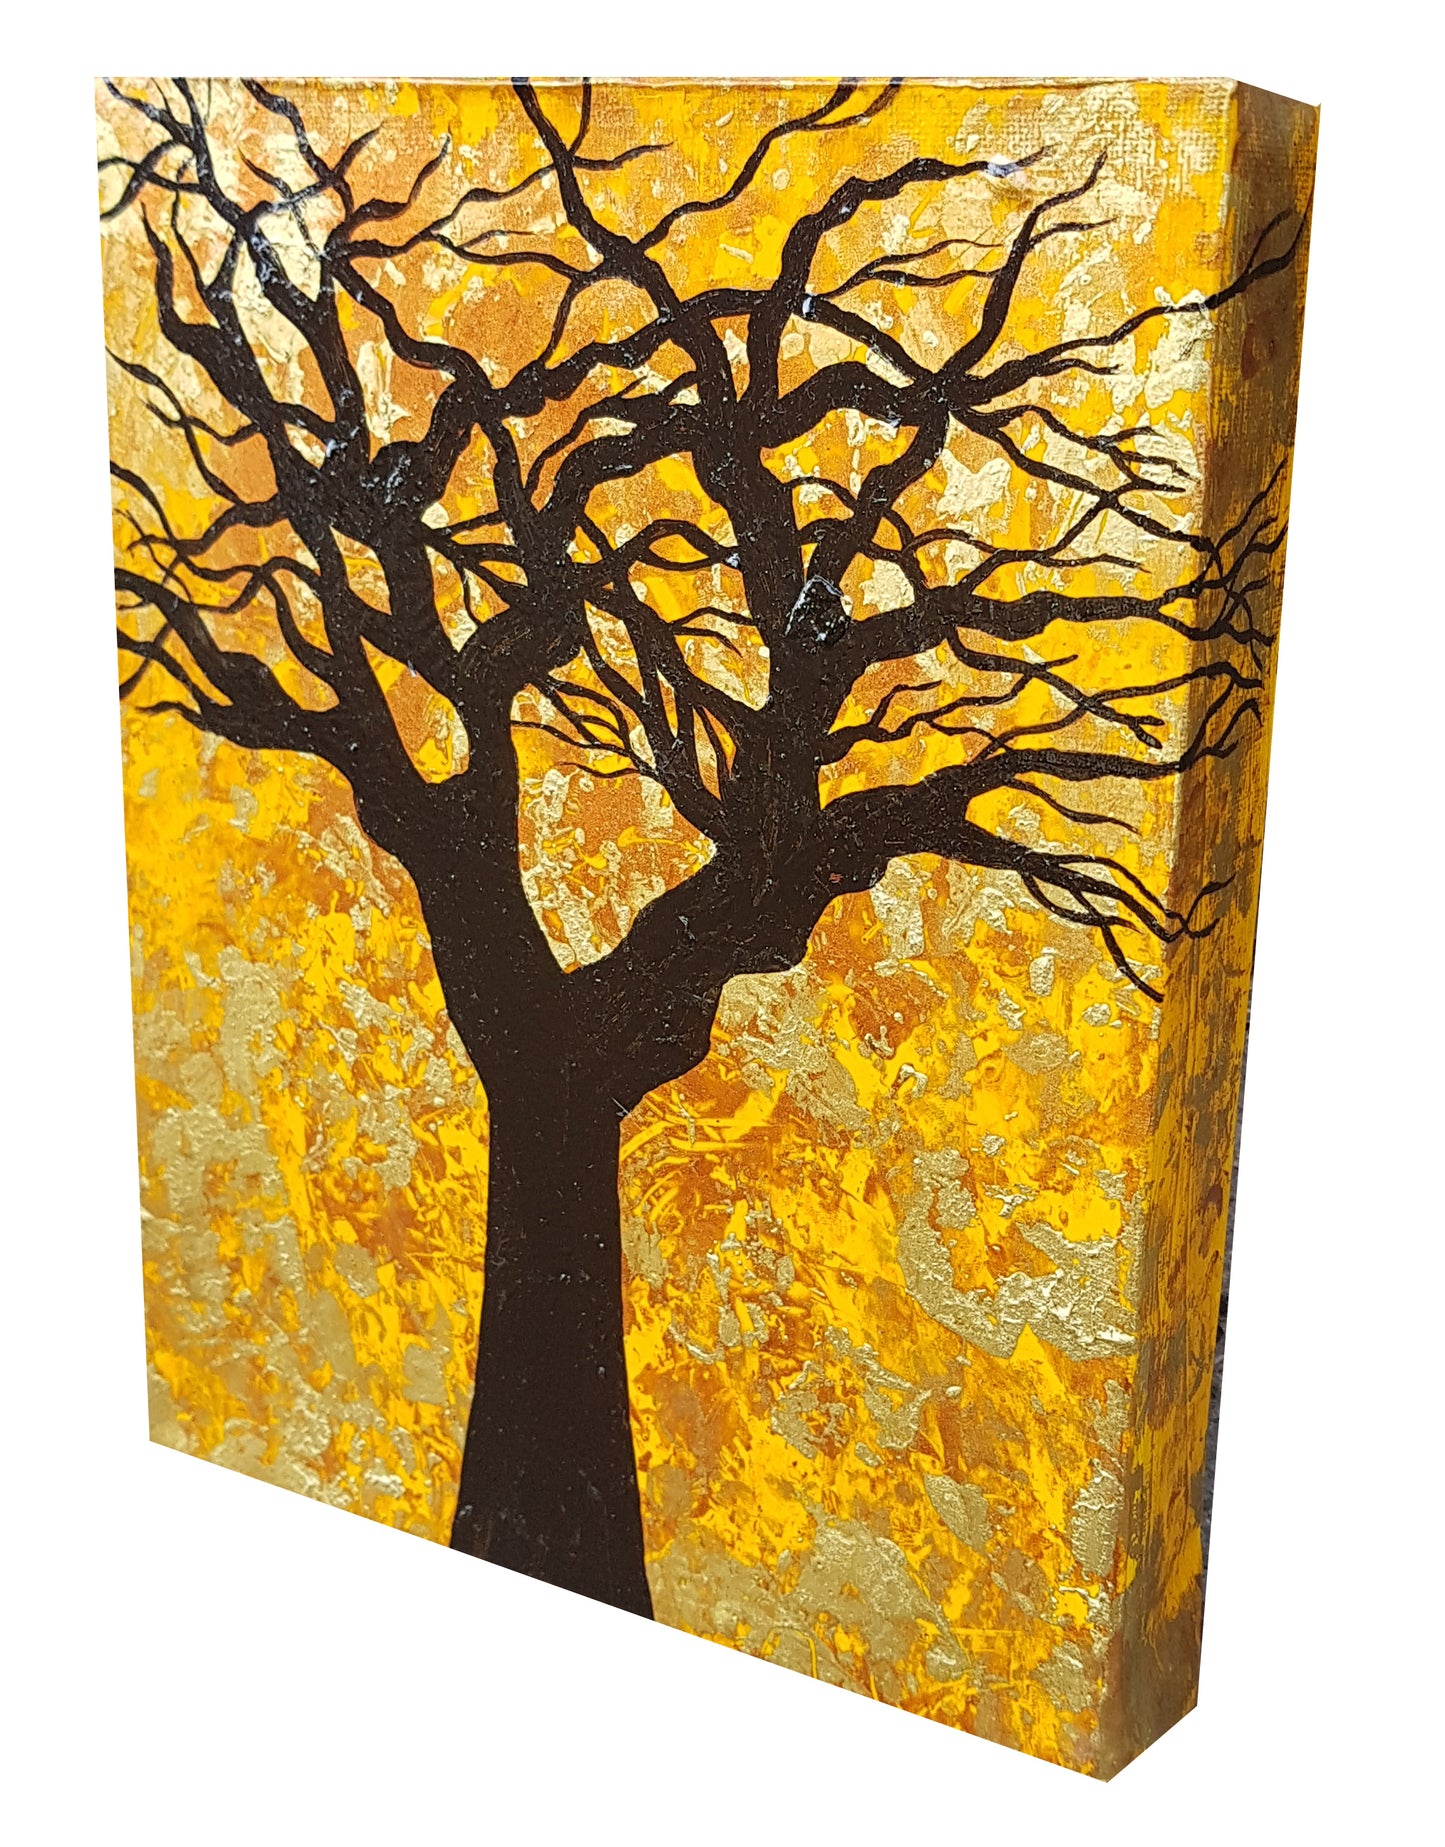 The-Root-of-Evil-by-Alexandra-Romano-Original-Amazing-Tree-Painting-Abstract-Expressionism-Impressionism-Artwork-Yellow-Gold-Black-Copper-Beautiful-Art-Gallery-In-Toronto-Canada-witch-tree-black-branches